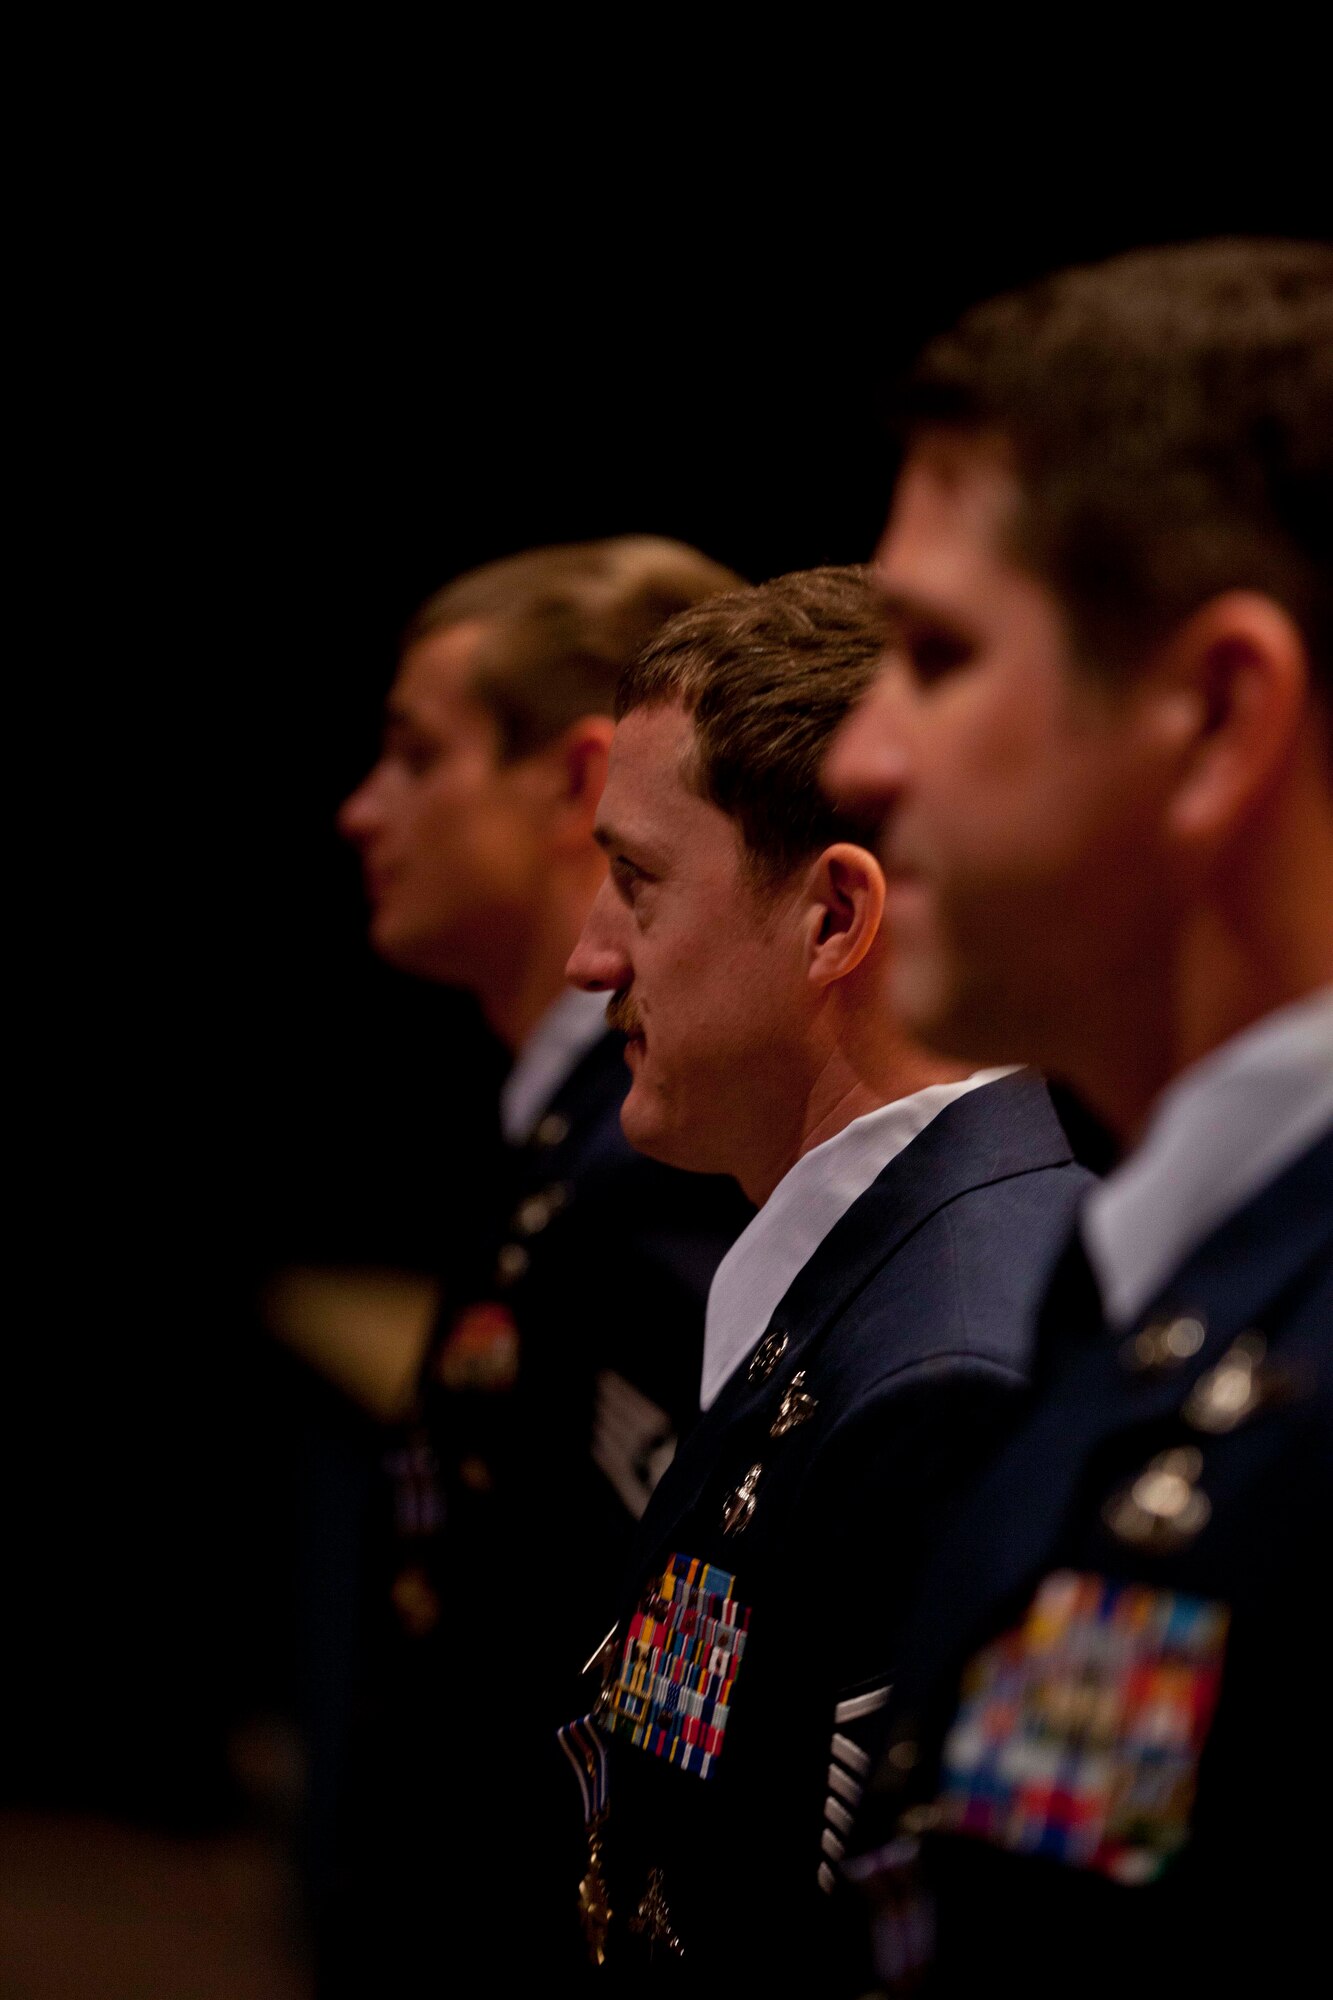 Master Sgt. Brandon Stuemke (center), Senior Master Sgt. Christopher “Doug” Widener (left) and Staff Sgt. Aaron Parcha wait to shake hands with the hundreds of attendees to the Distinguished Flying Cross with Valor Medal presentation at the Talkeetna Theater on Joint Base Elmendorf-Richardson Nov. 3.. The three pararescuemen from the 212th Rescue Squadron conducted more than 20 missions in 5 days, including treating a fellow pararescueman from a gunshot wound while under enemy fire. Photo by Lt. Bernie Kale, Alaska National Guard Public Affairs Office